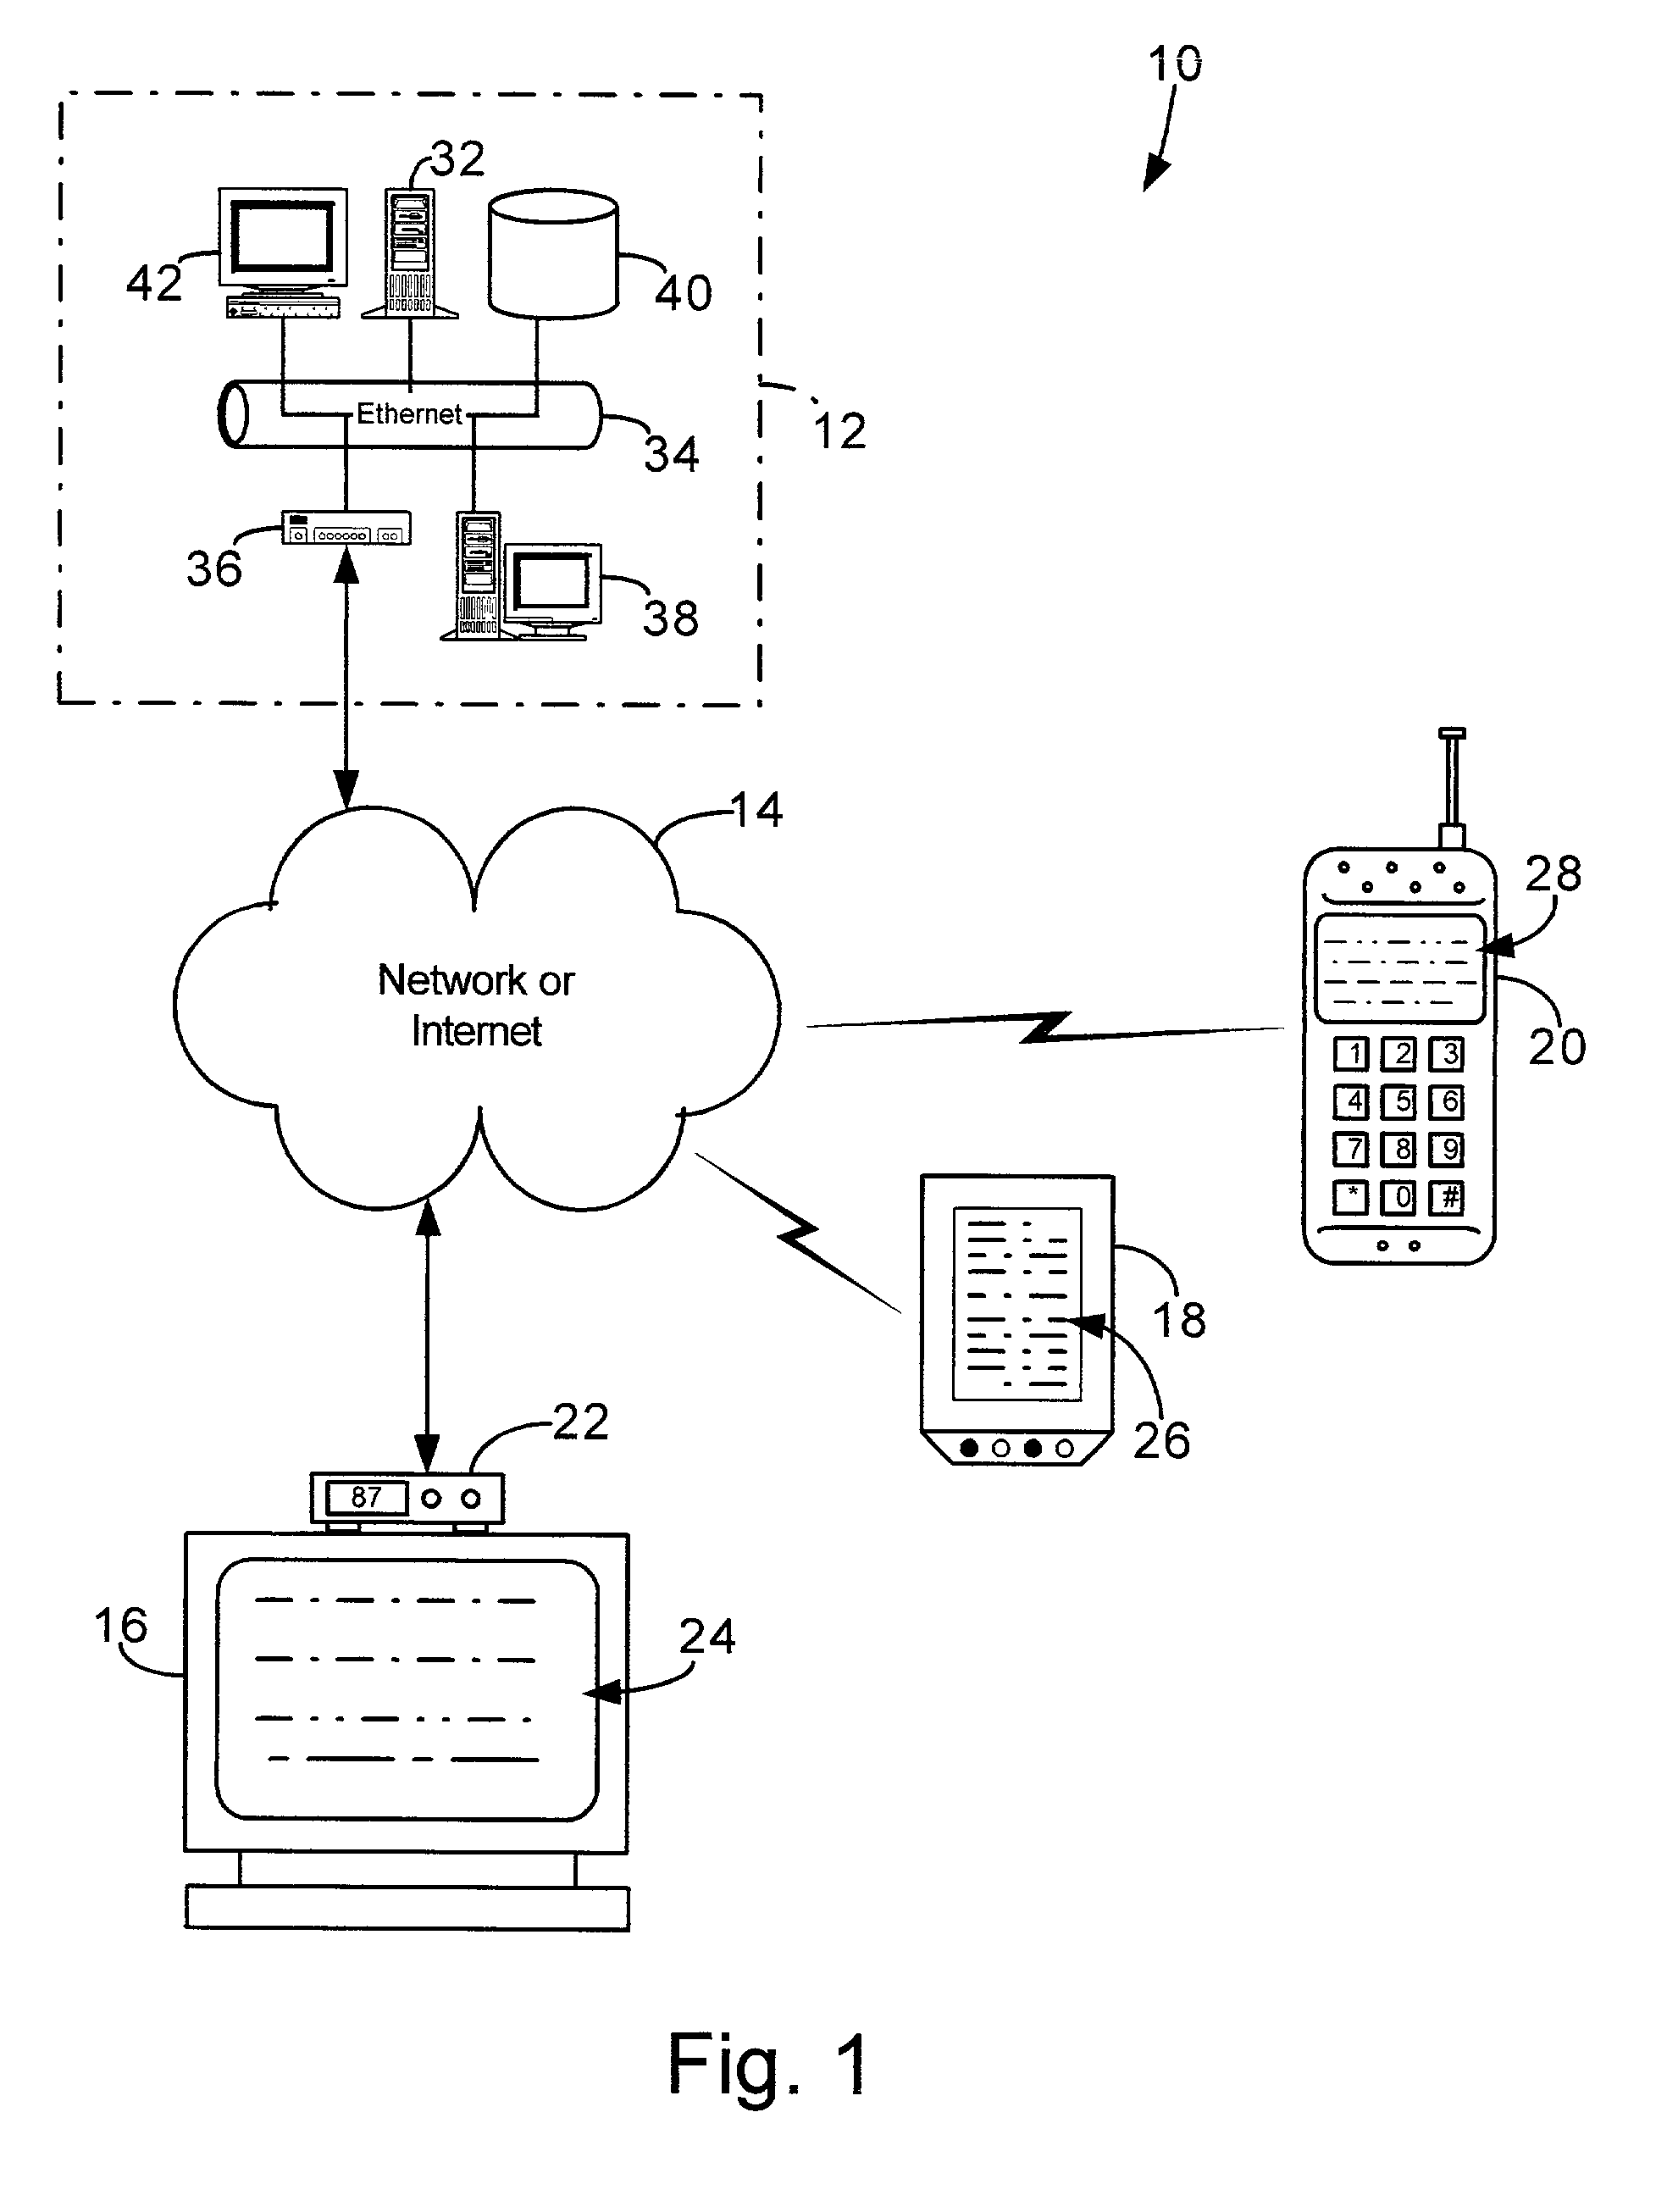 Image display system with visual server